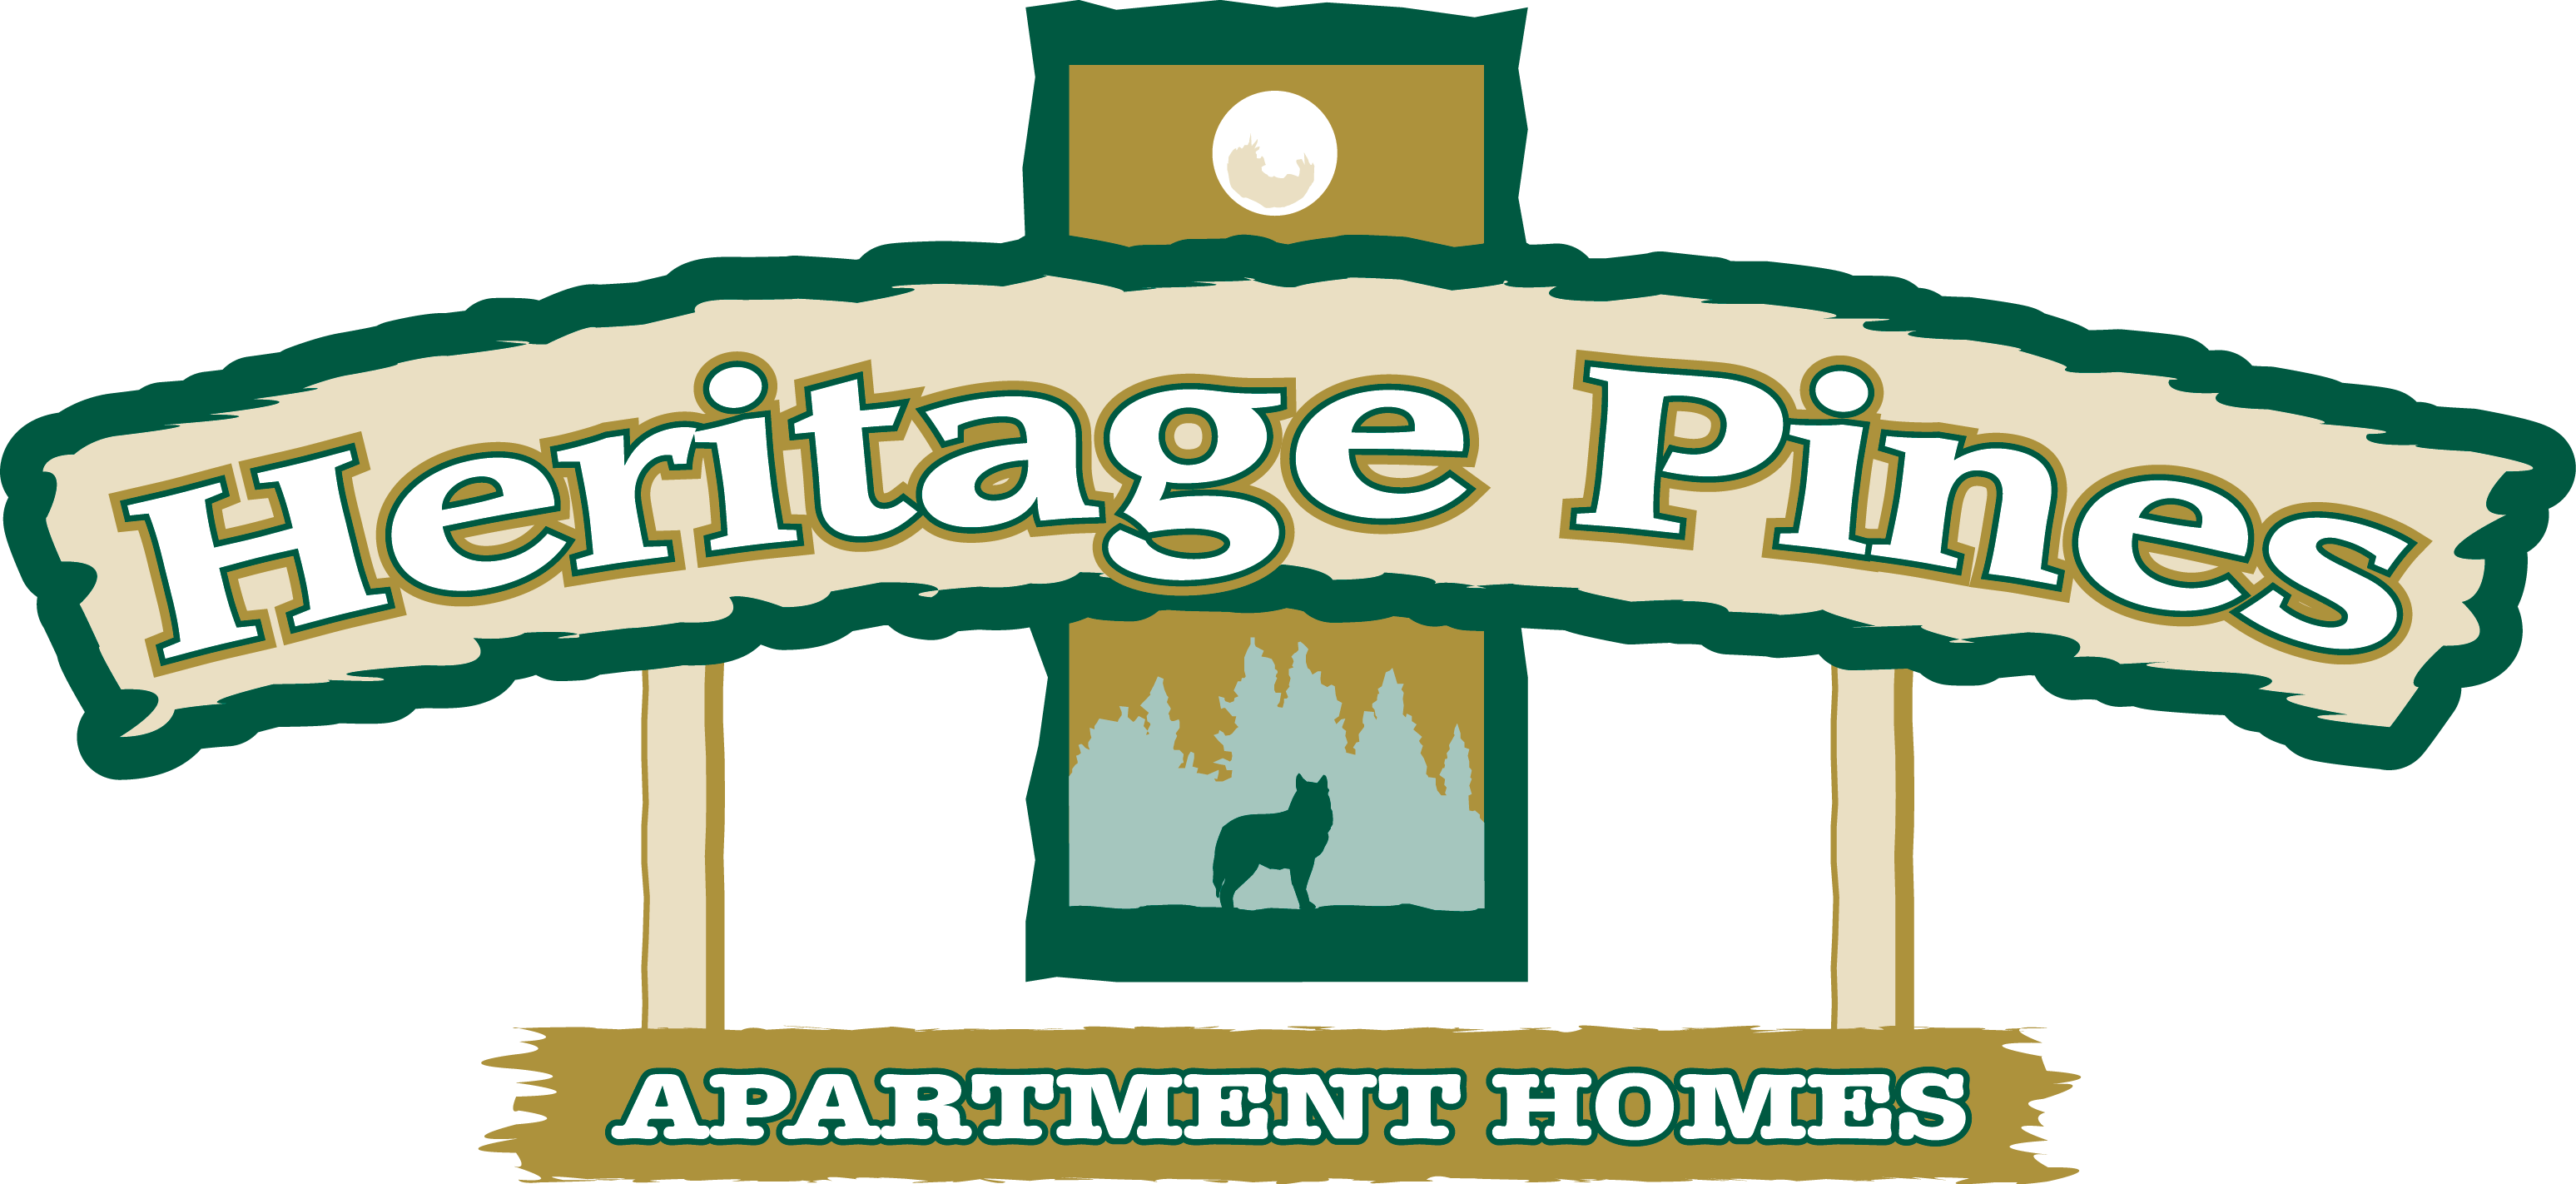 Heritage Pines Apartments For Rent In Tampa, Fl - Heritage Pines Apartments (3095x1422)